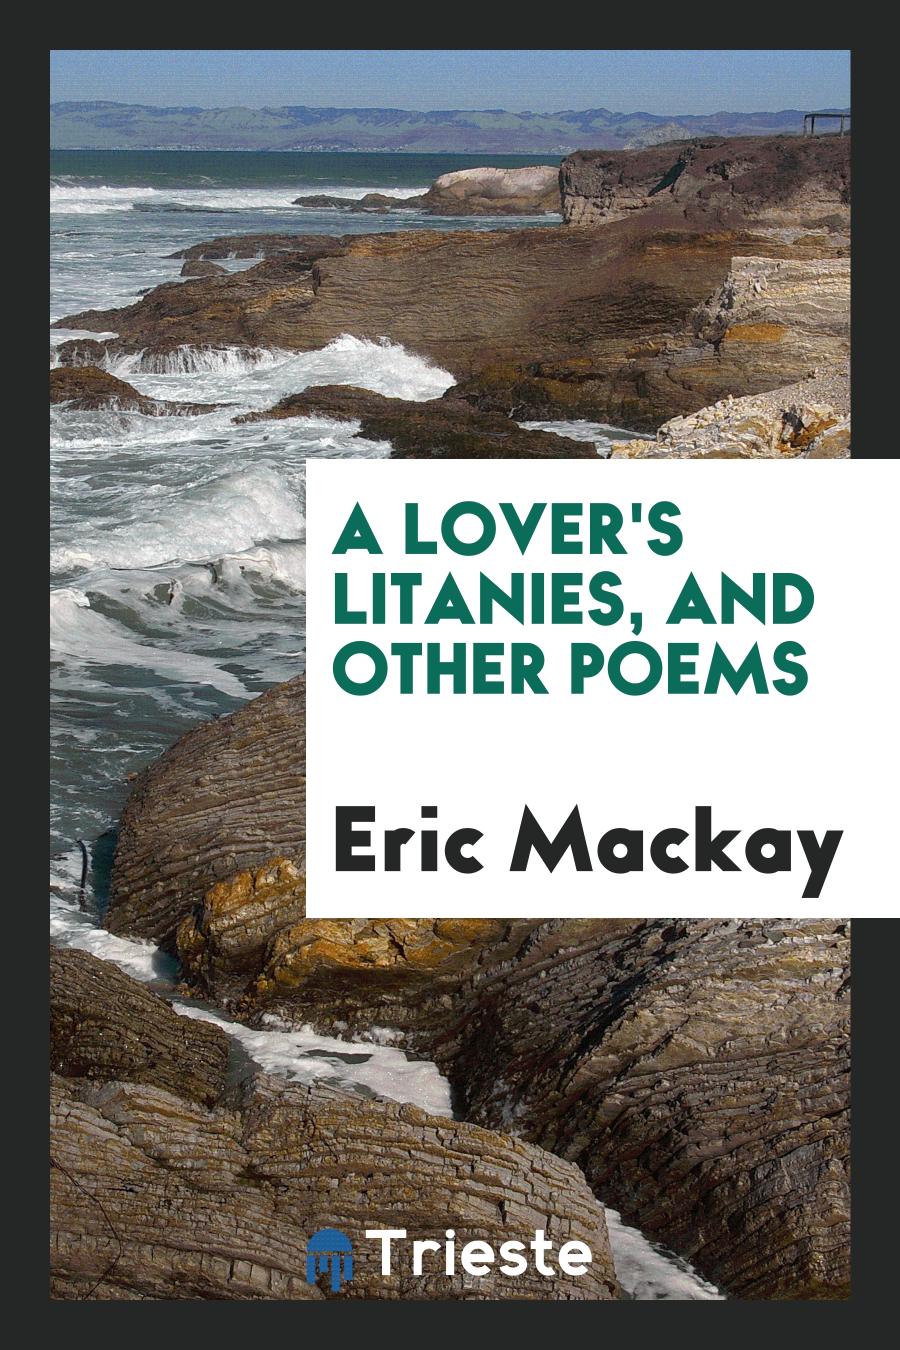 A lover's litanies, and other poems